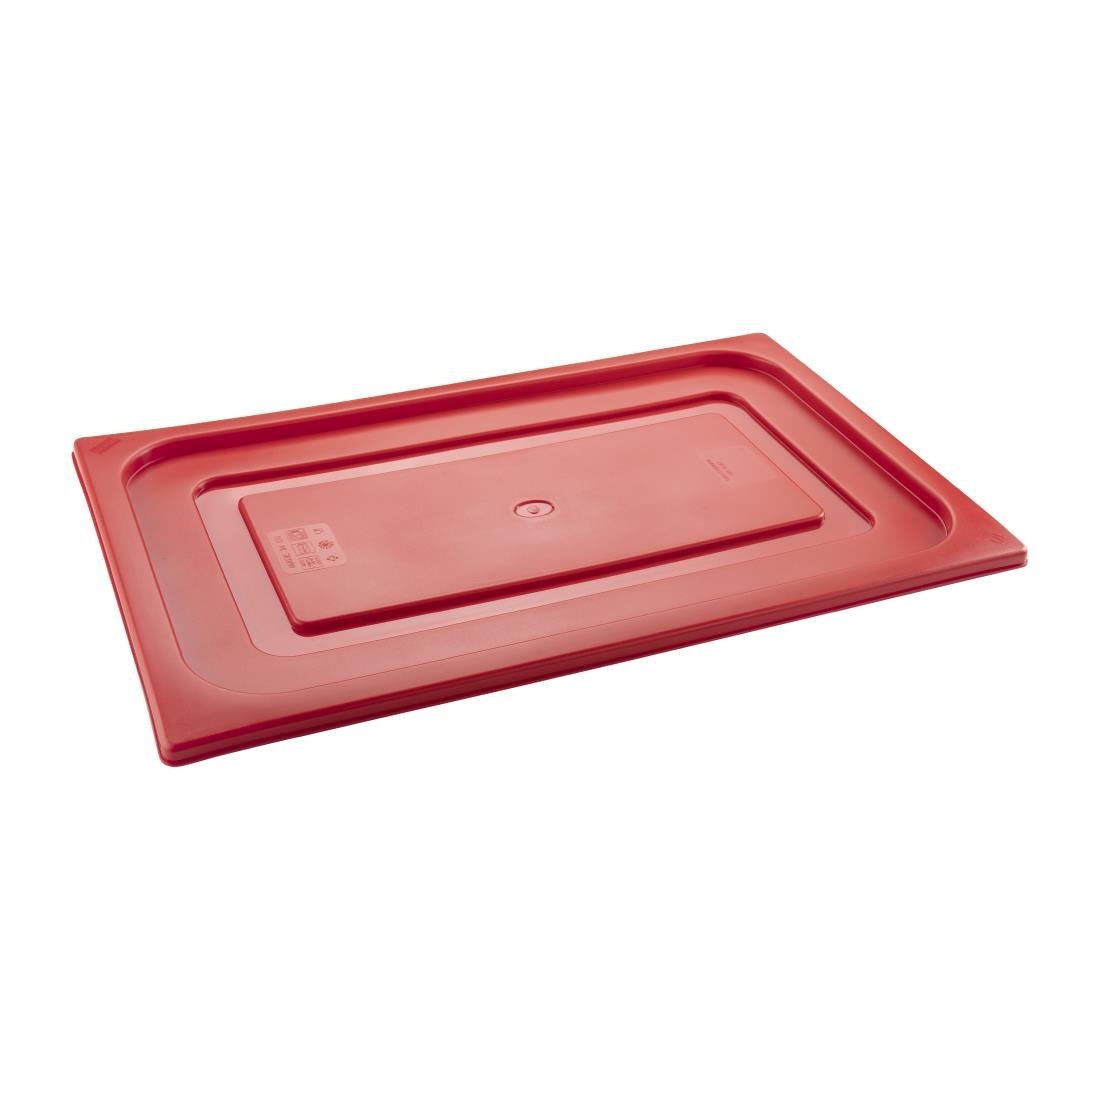 HT893 Pujadas Red Polinorm Gastronorm Lid 1/9GN